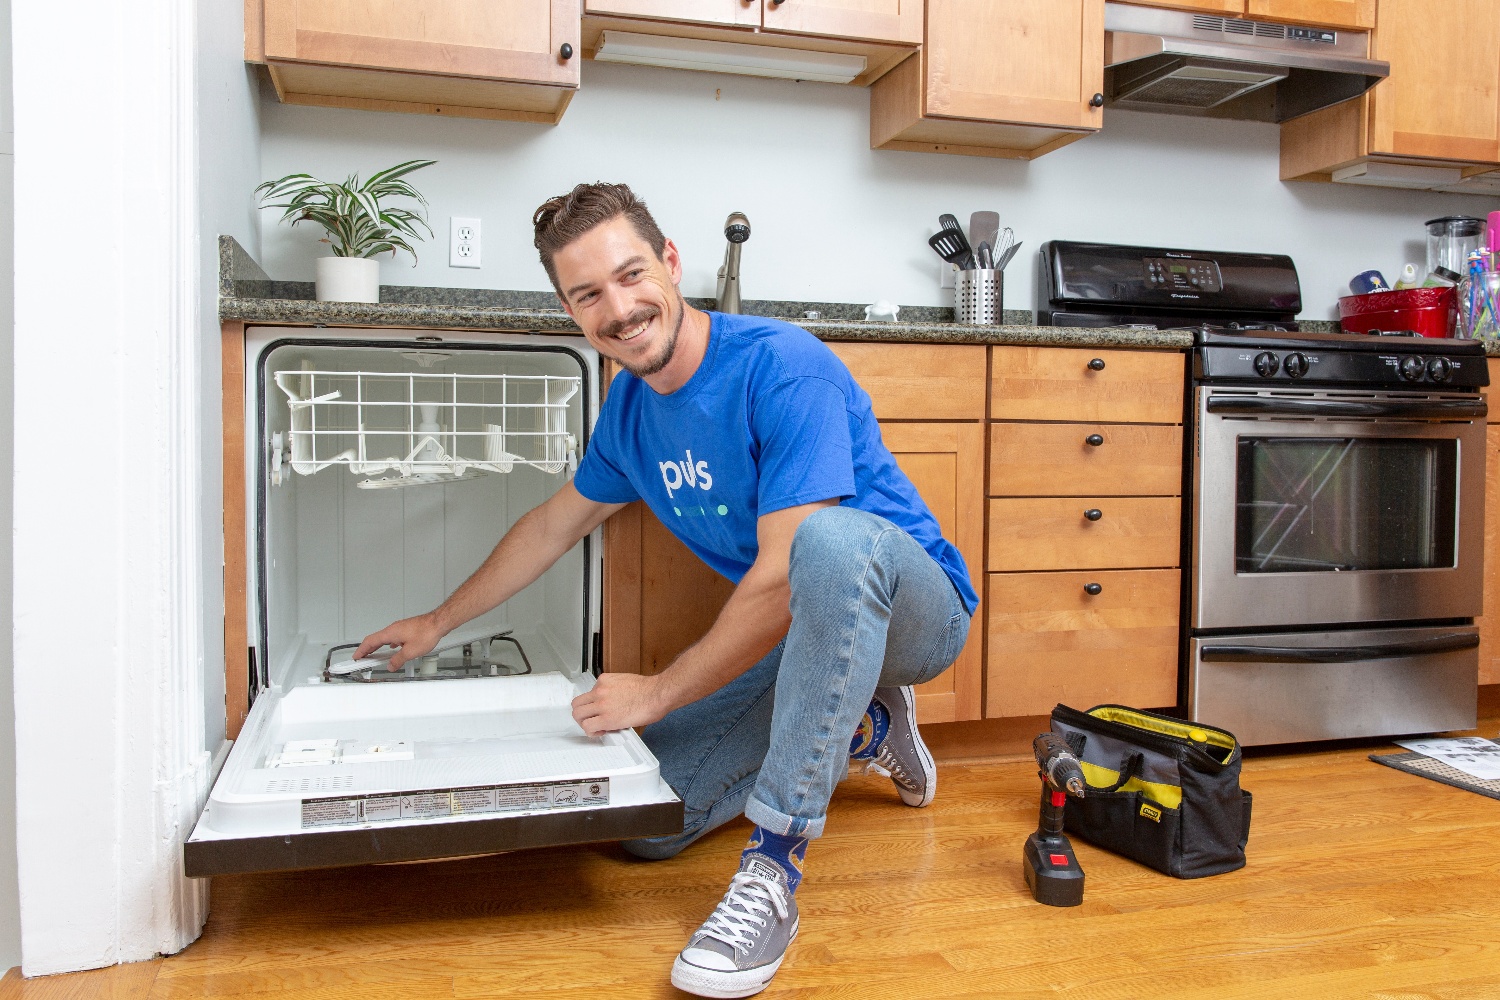 Appliance Repair Near Me: How to Find The Best Company